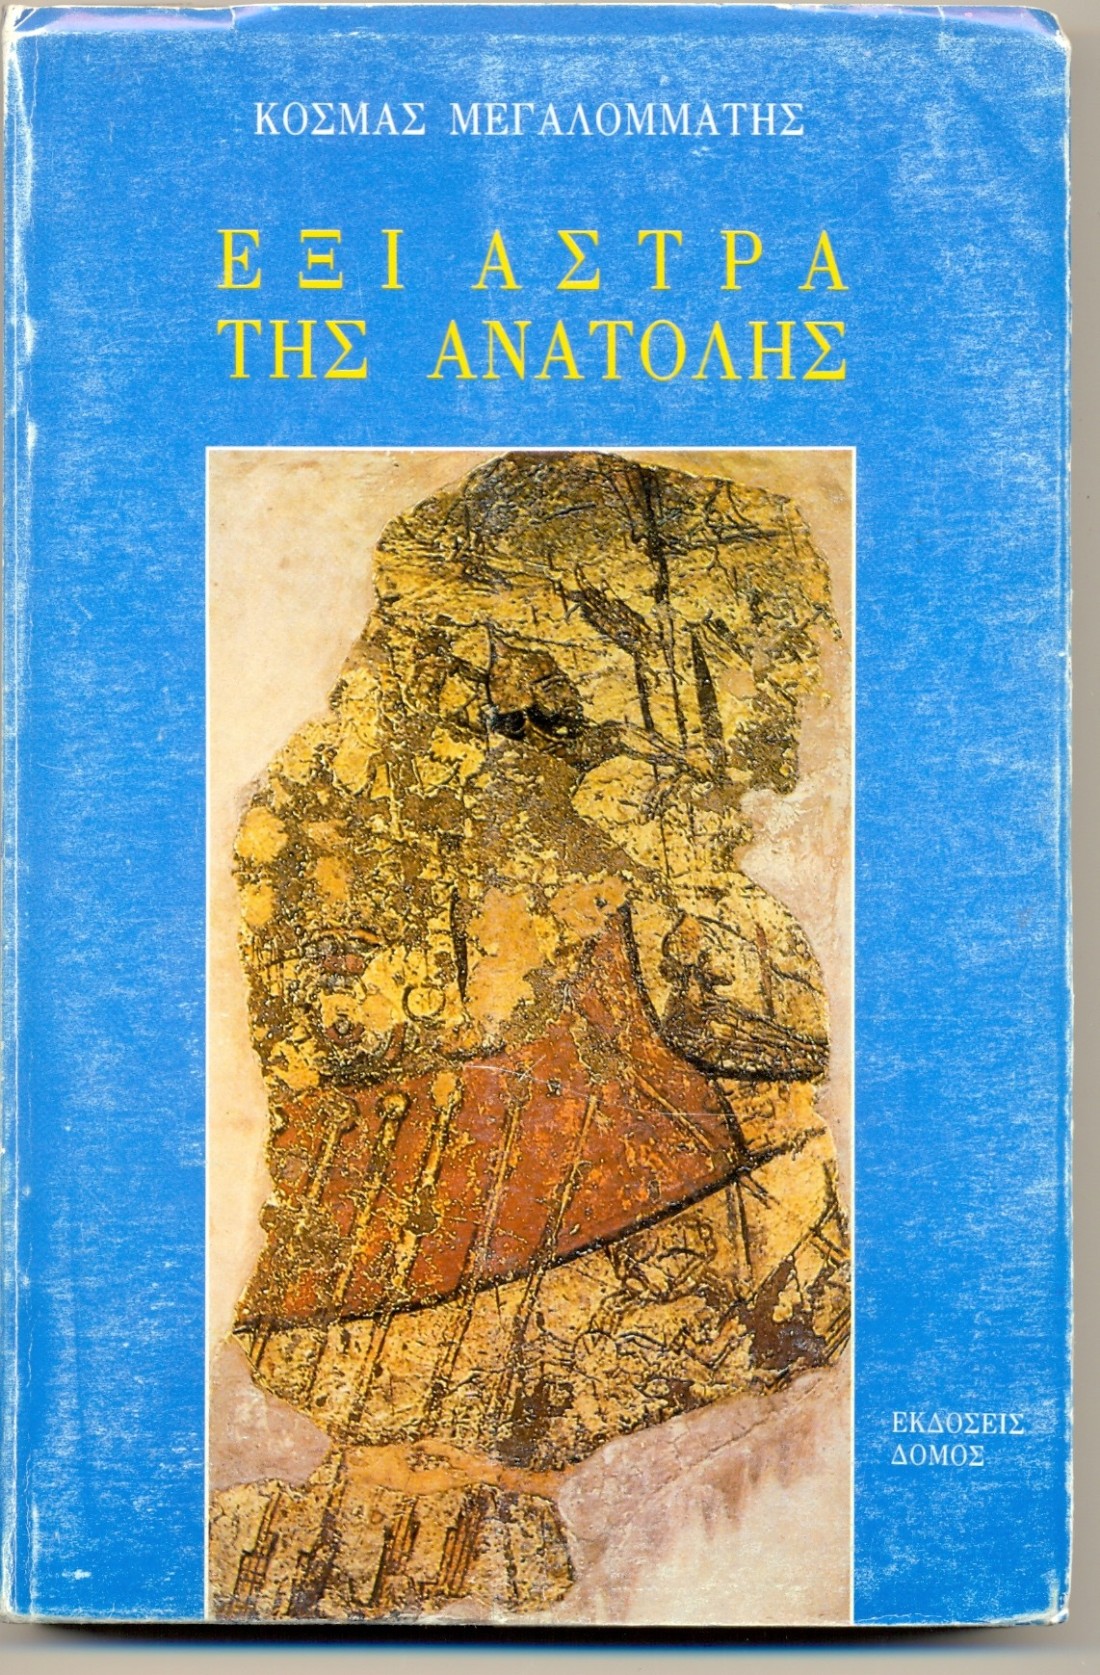 Cover Page of the book.jpg